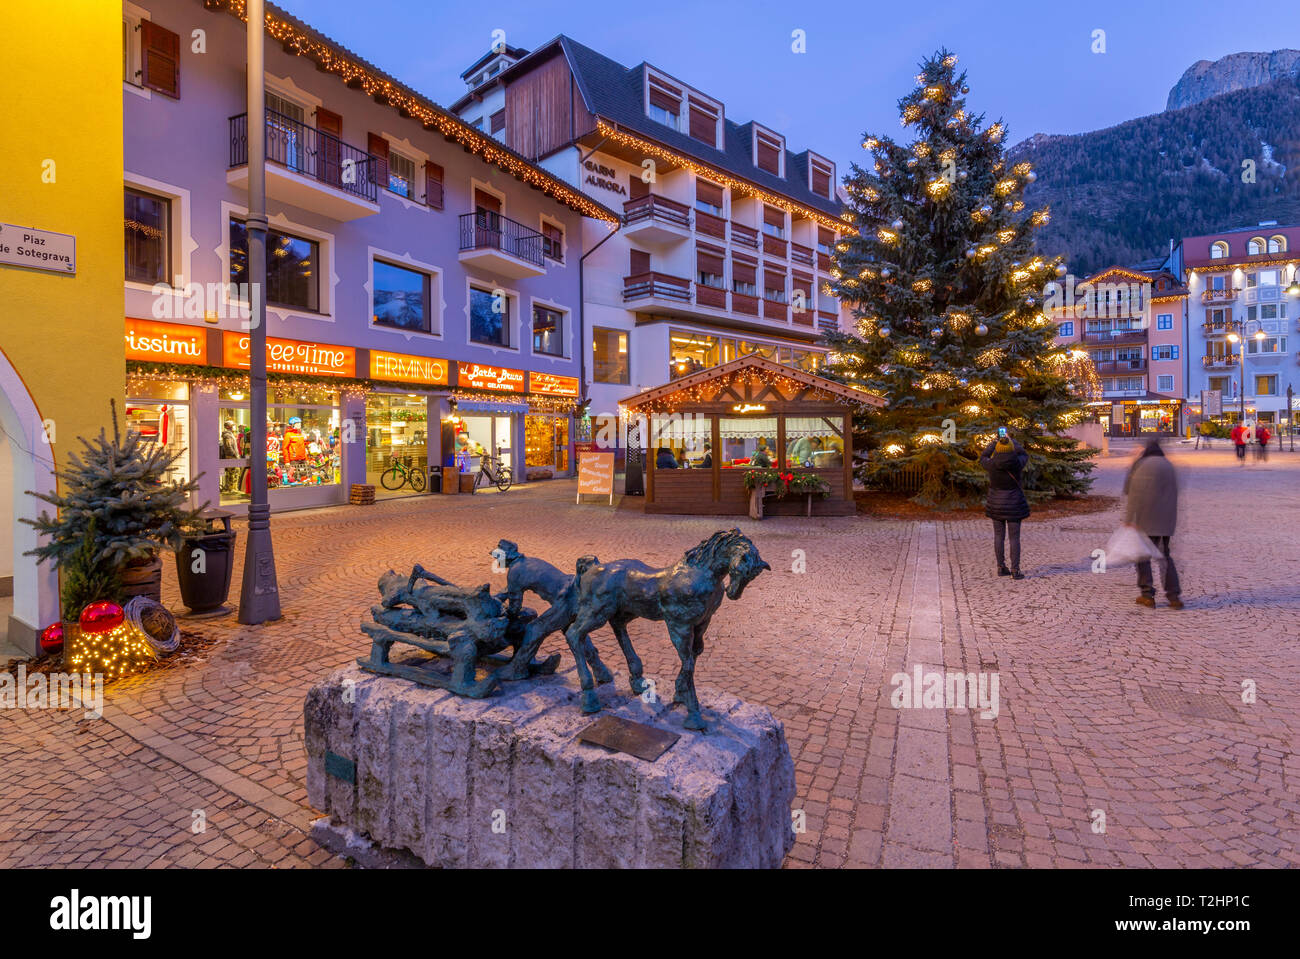 View of Moena town centre at Christmas, Province of Trento, South Tyrol, Italy, Europe Stock Photo